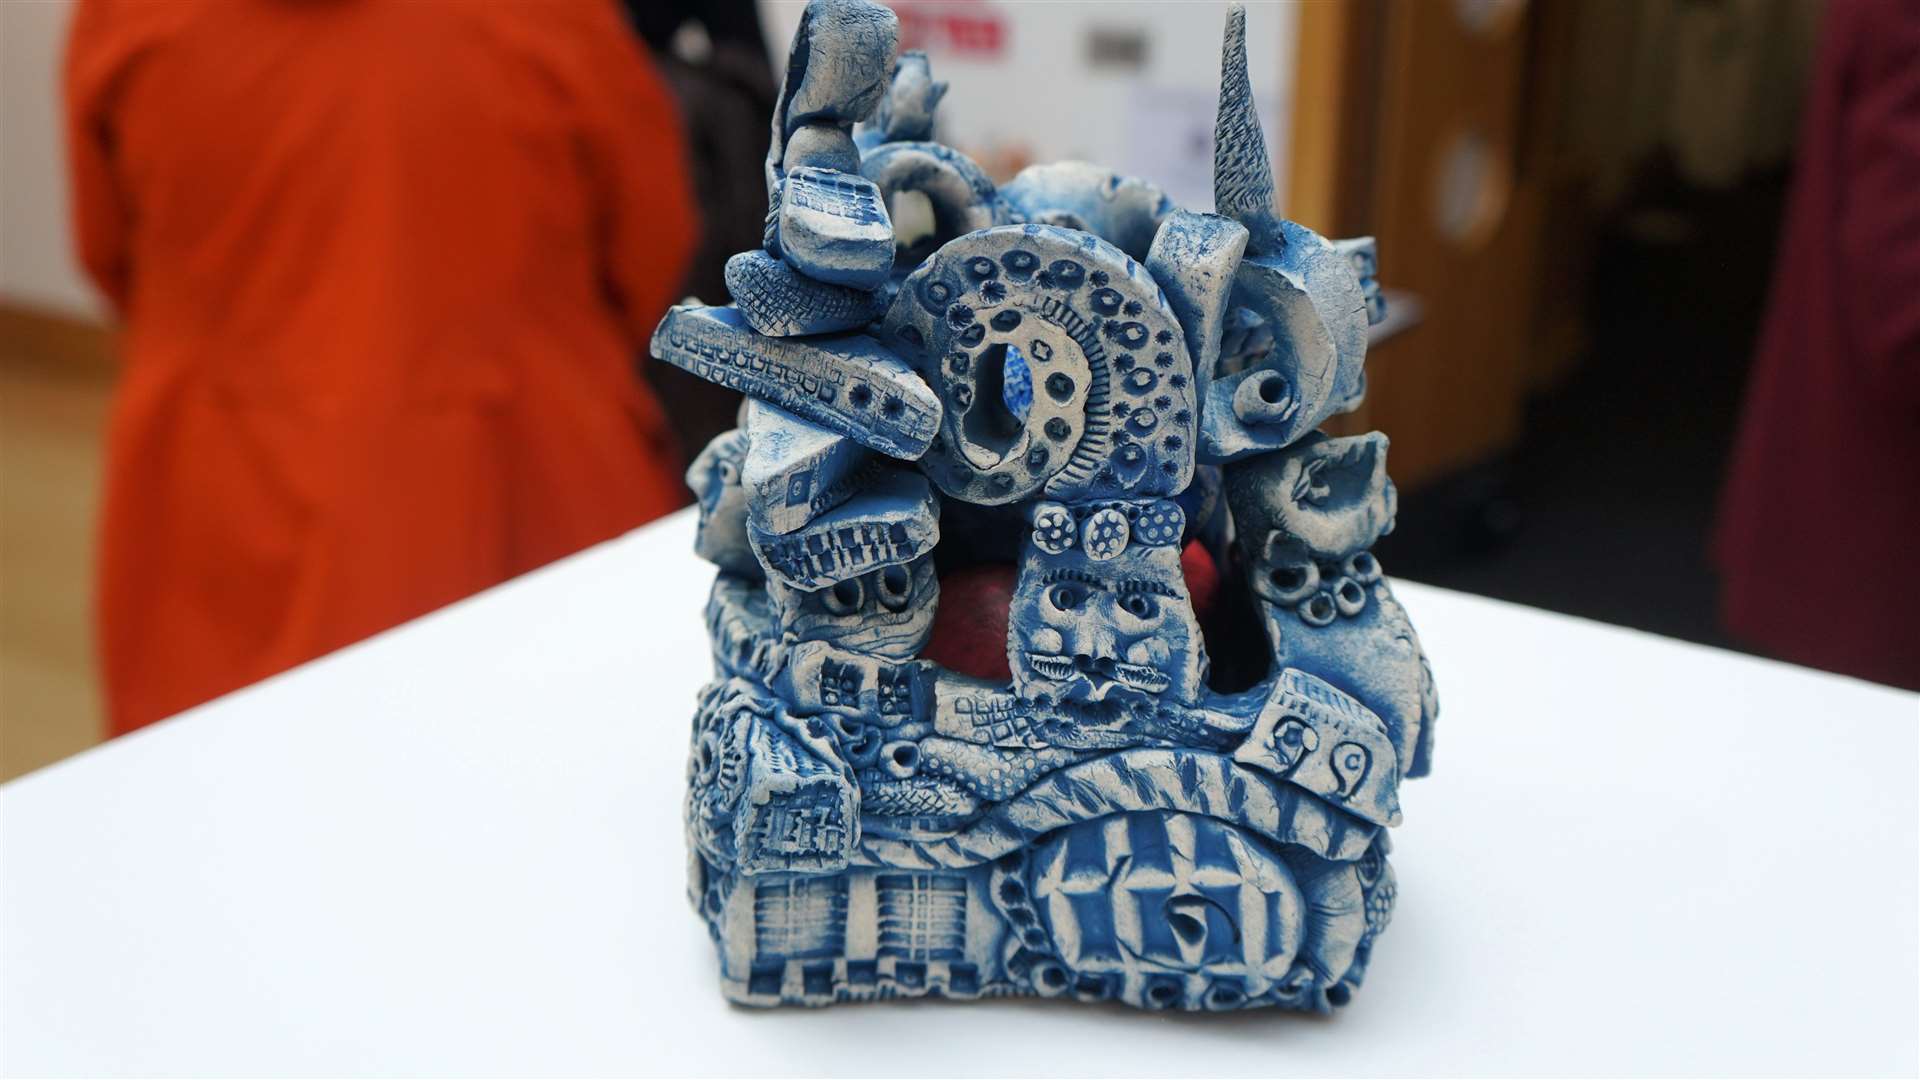 David Kinghorn's glazed stoneware clay sculpture is incredibly detailed. Picture: DGS